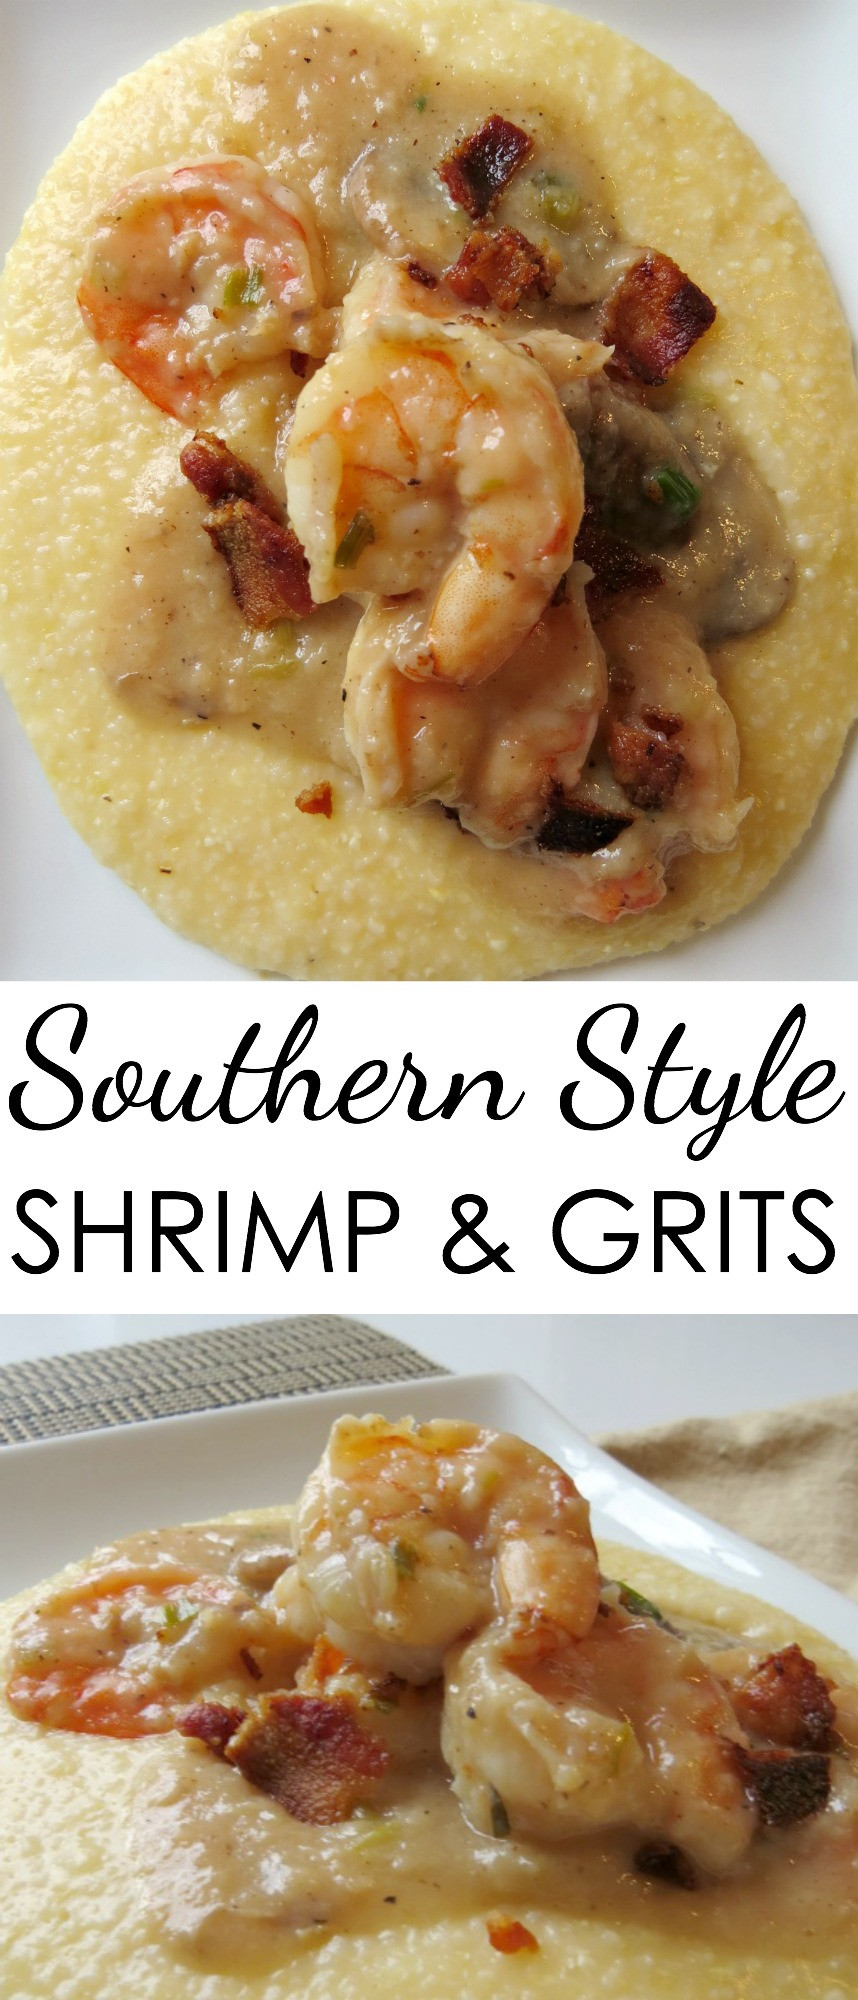 Recipes For Shrimp And Grits
 Easy Shrimp Grits Recipes Written Reality